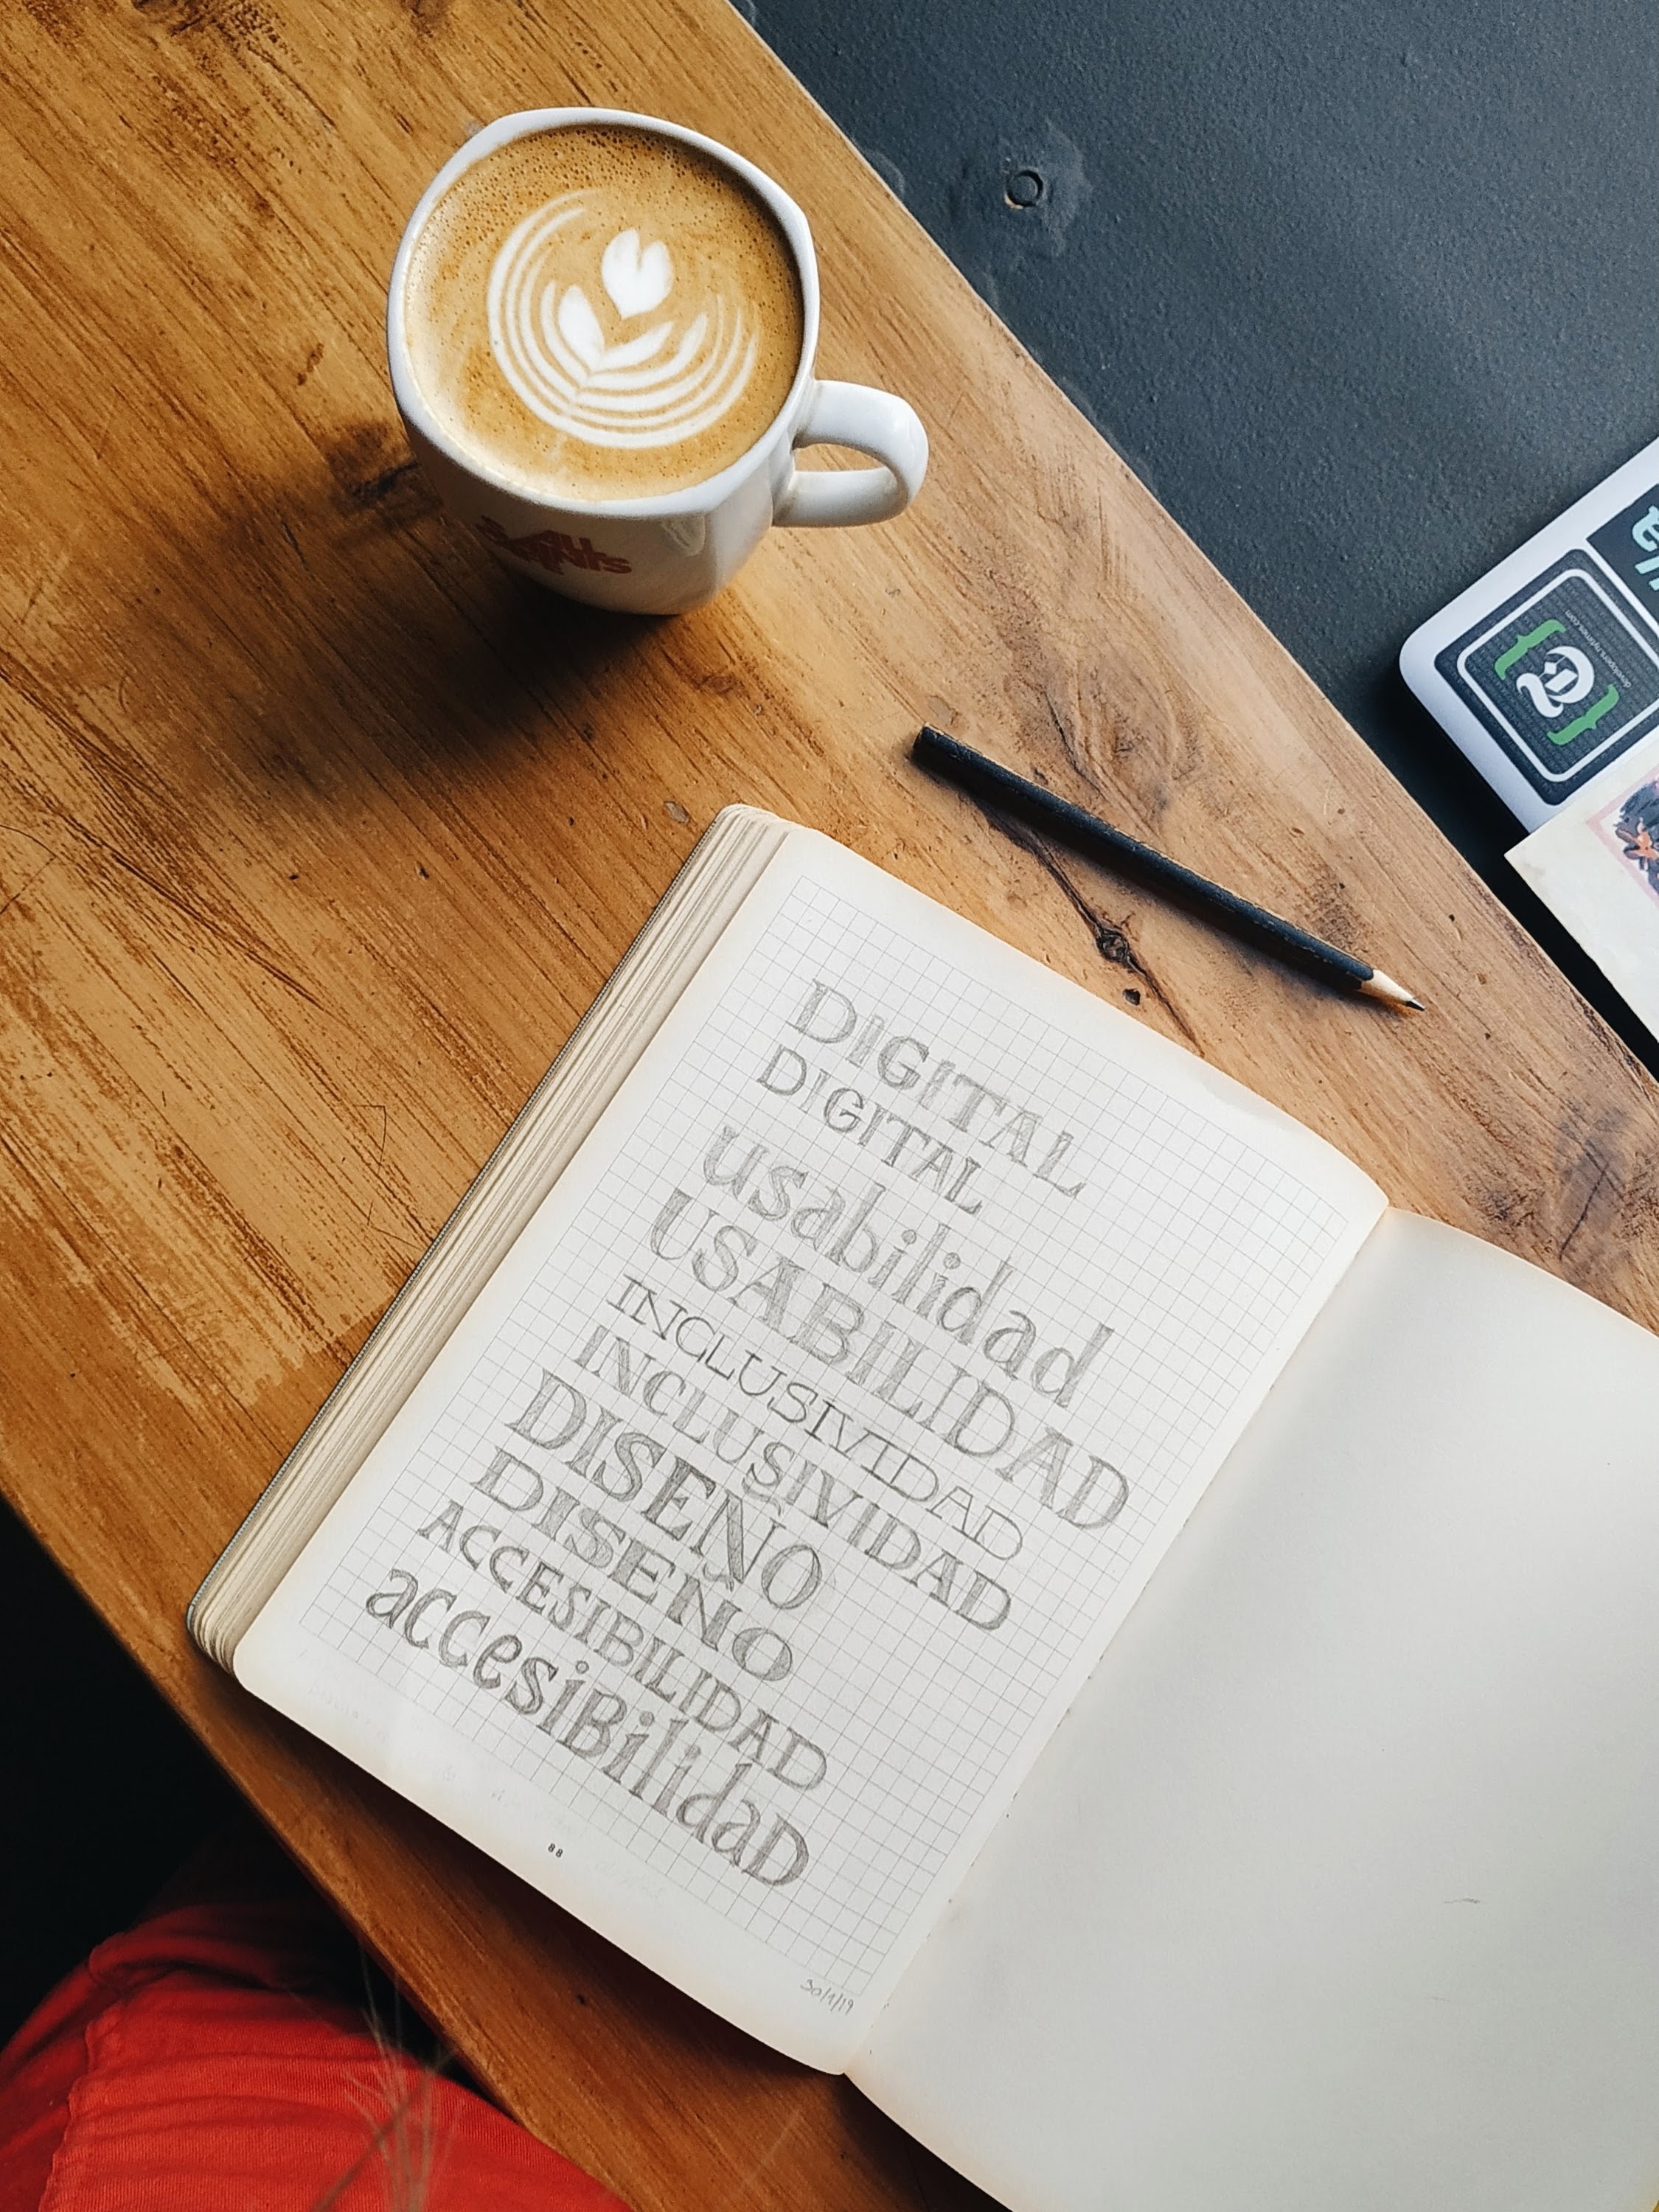 A white ceramic mug full of coffee on a wooden desk next to a notebook that says different accessibility terms.